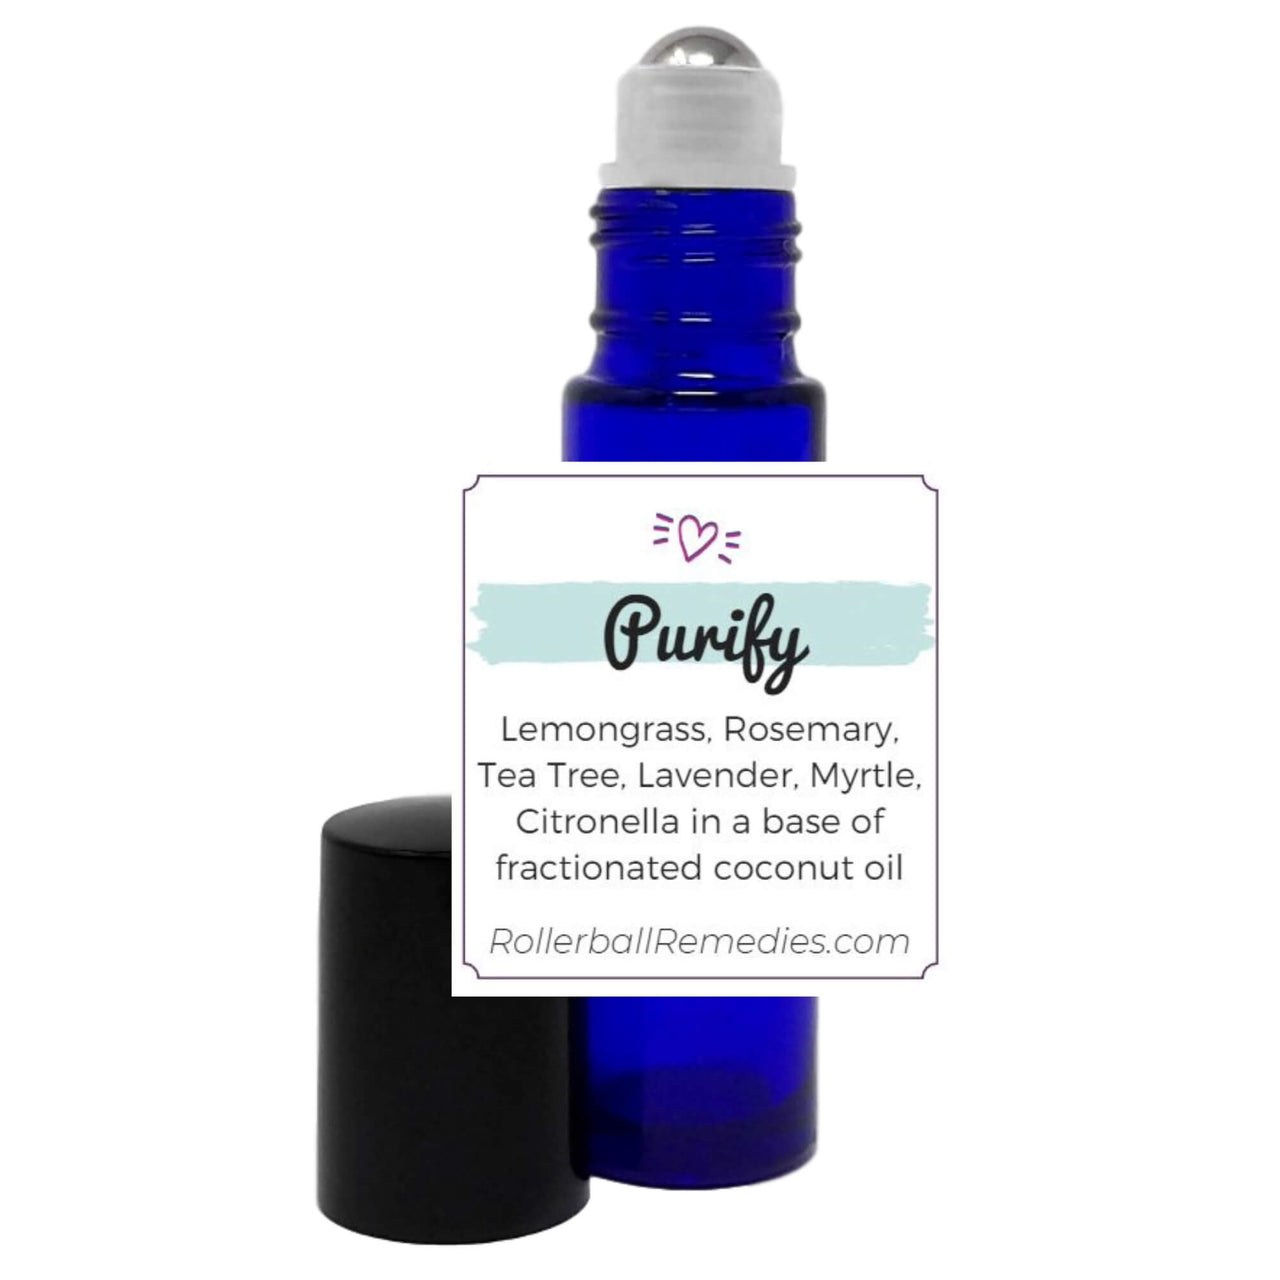 Purify Essential Oil Blend - 10 ml Roller Bottle with Lemongrass, Rosemary, Tea Tree, Lavender, Myrtle, and Citronella